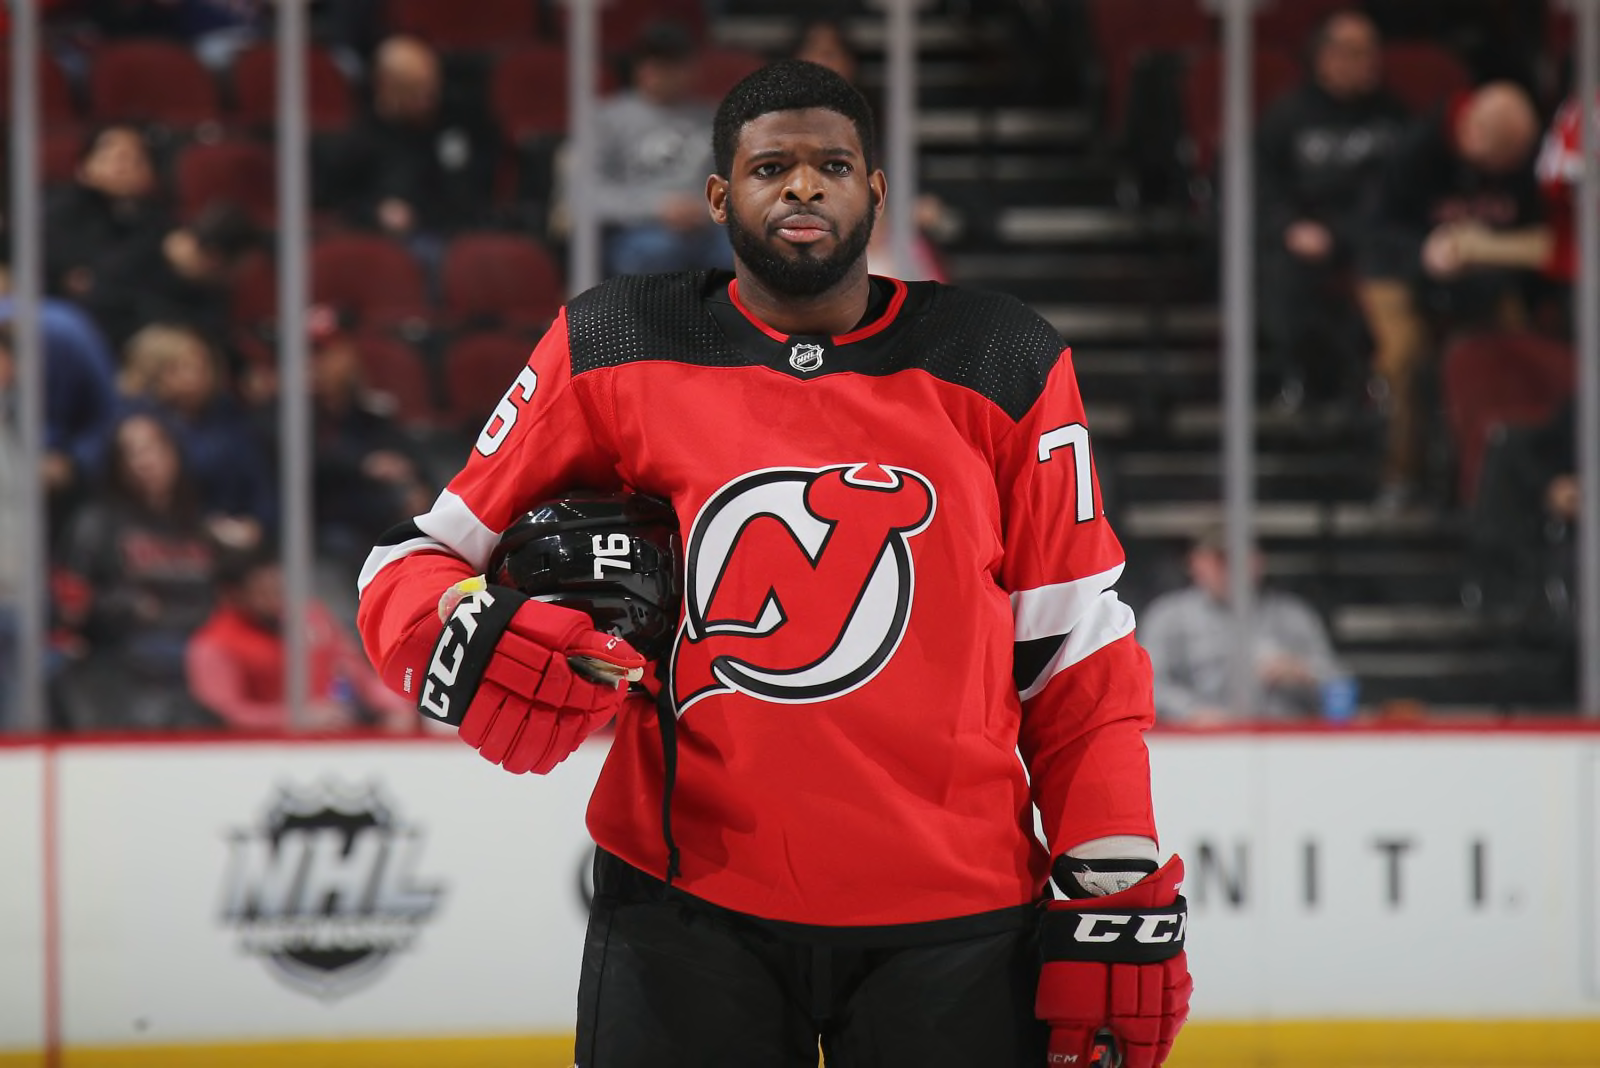 How many black players are in the NHL?